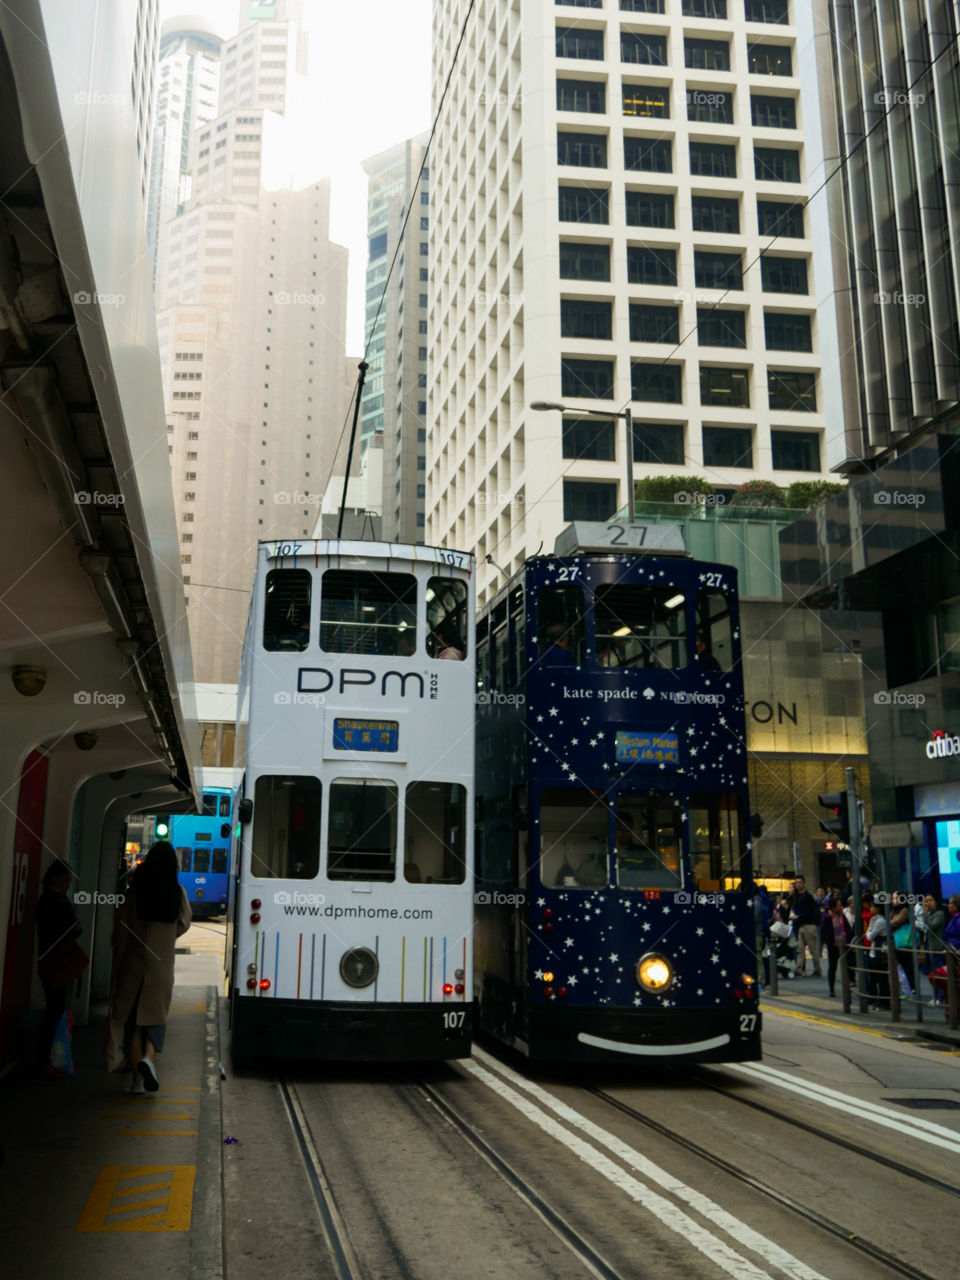 A white and black tram cars in Hong Kong Central. Getting places during the day.